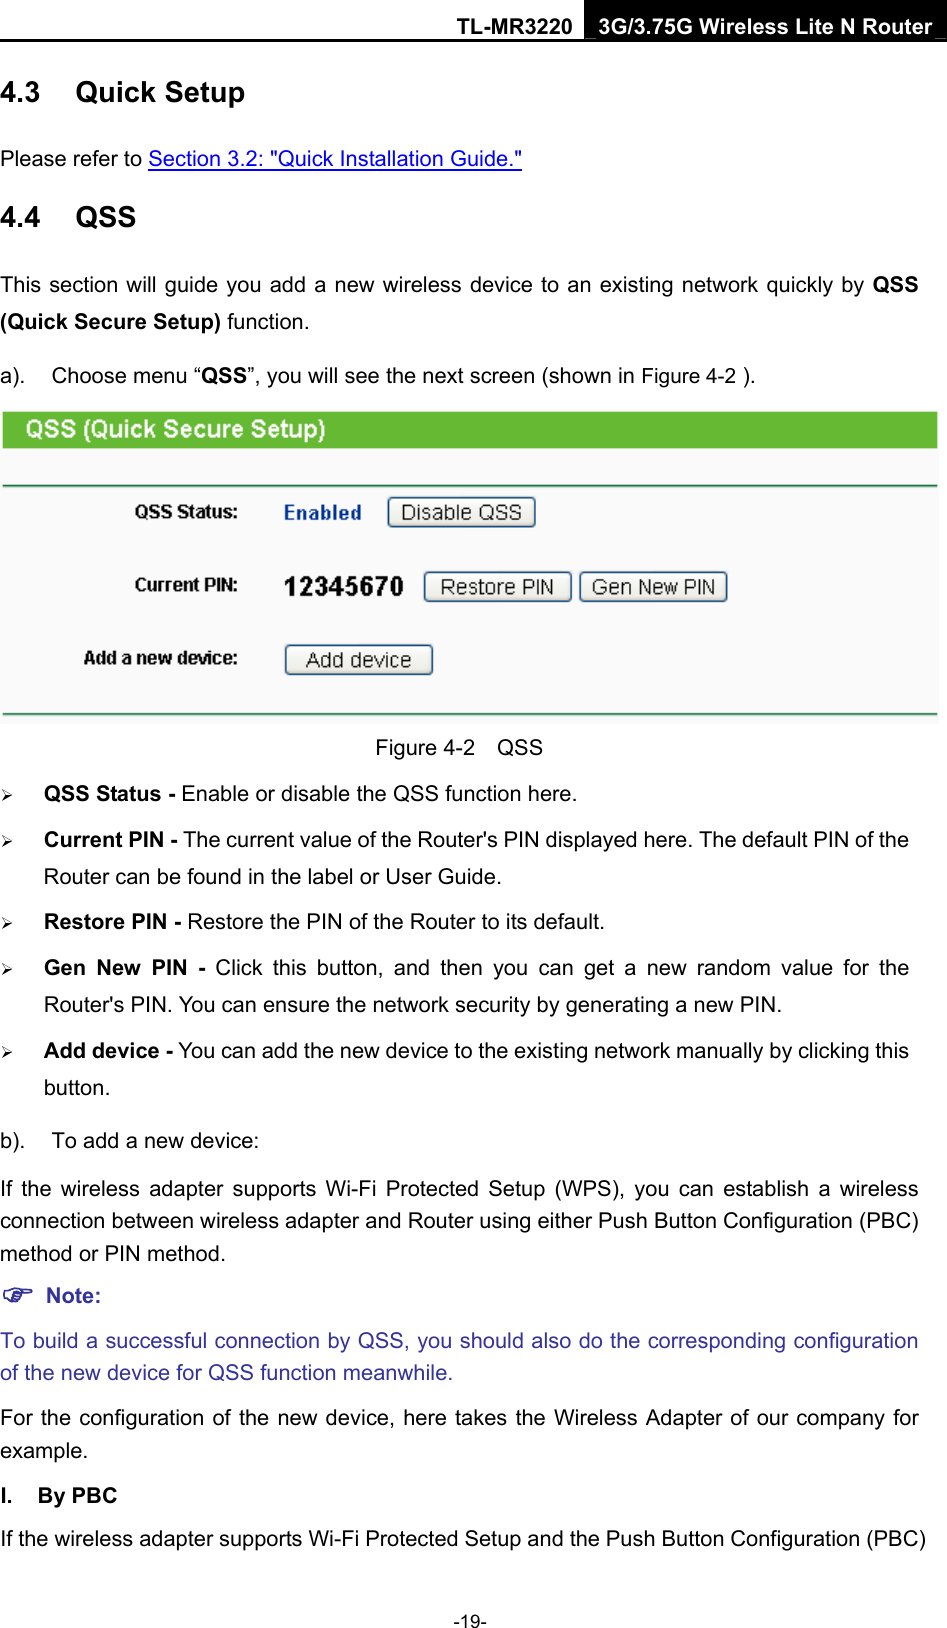 TL-MR3220 3G/3.75G Wireless Lite N Router -19- 4.3  Quick Setup Please refer to Section 3.2: &quot;Quick Installation Guide.&quot; 4.4  QSS This section will guide you add a new wireless device to an existing network quickly by QSS (Quick Secure Setup) function.   a).  Choose menu “QSS”, you will see the next screen (shown in Figure 4-2 ).  Figure 4-2  QSS ¾ QSS Status - Enable or disable the QSS function here.   ¾ Current PIN - The current value of the Router&apos;s PIN displayed here. The default PIN of the Router can be found in the label or User Guide.   ¾ Restore PIN - Restore the PIN of the Router to its default.   ¾ Gen New PIN - Click this button, and then you can get a new random value for the Router&apos;s PIN. You can ensure the network security by generating a new PIN.   ¾ Add device - You can add the new device to the existing network manually by clicking this button.  b).  To add a new device: If the wireless adapter supports Wi-Fi Protected Setup (WPS), you can establish a wireless connection between wireless adapter and Router using either Push Button Configuration (PBC) method or PIN method. ) Note: To build a successful connection by QSS, you should also do the corresponding configuration of the new device for QSS function meanwhile. For the configuration of the new device, here takes the Wireless Adapter of our company for example. I. By PBC If the wireless adapter supports Wi-Fi Protected Setup and the Push Button Configuration (PBC) 